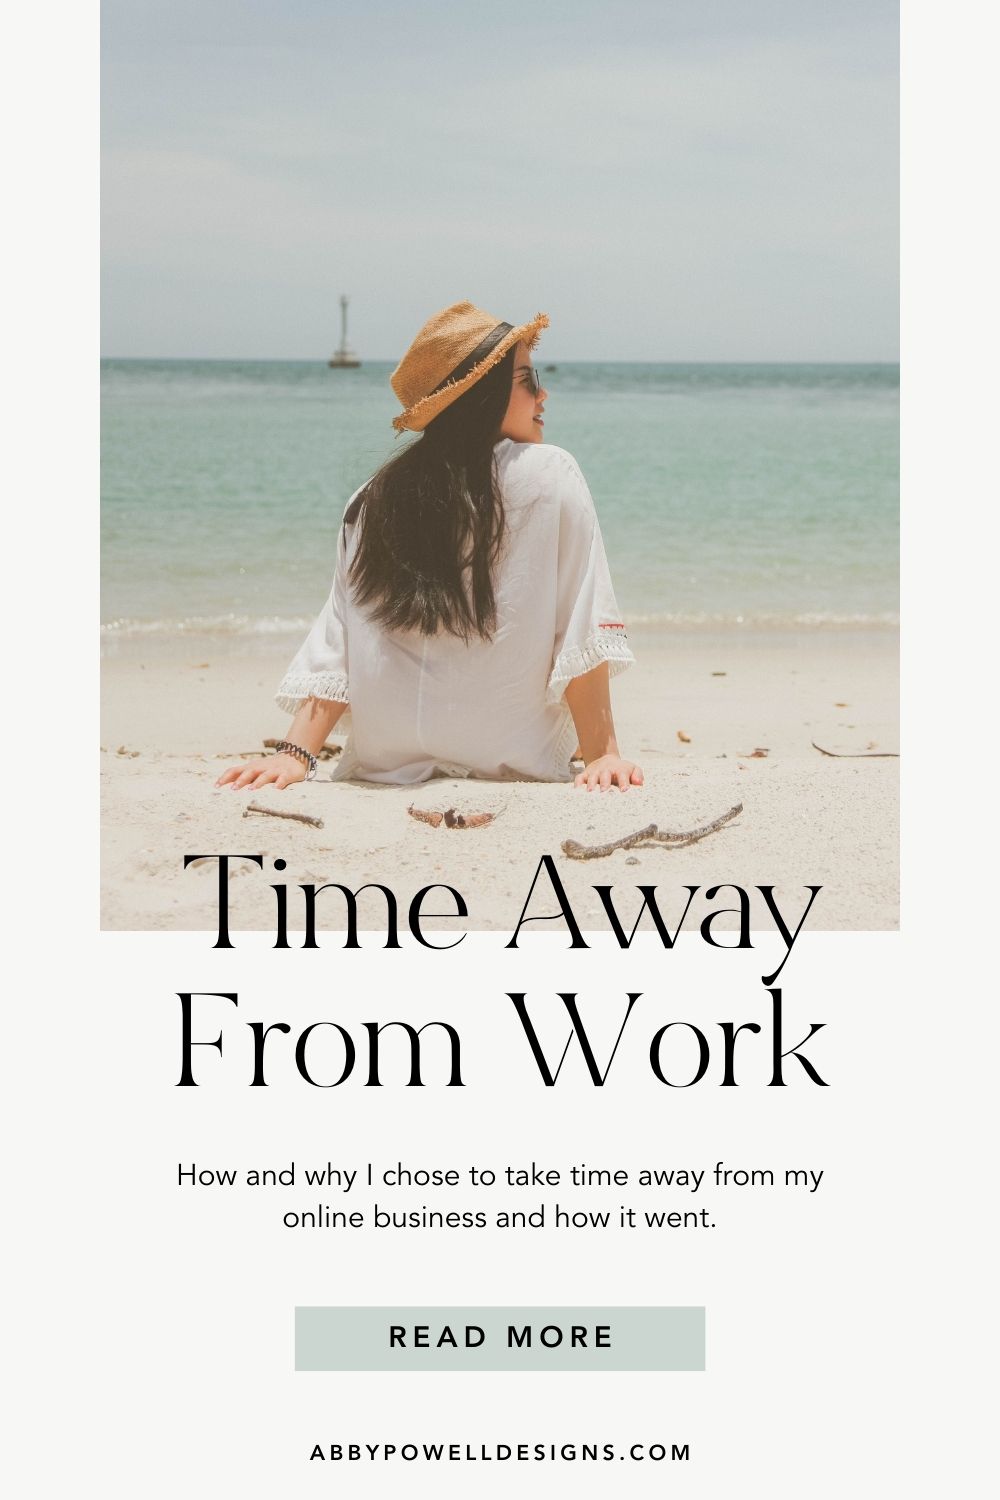 Taking time away from your online business. Time away from work when you own a small business.